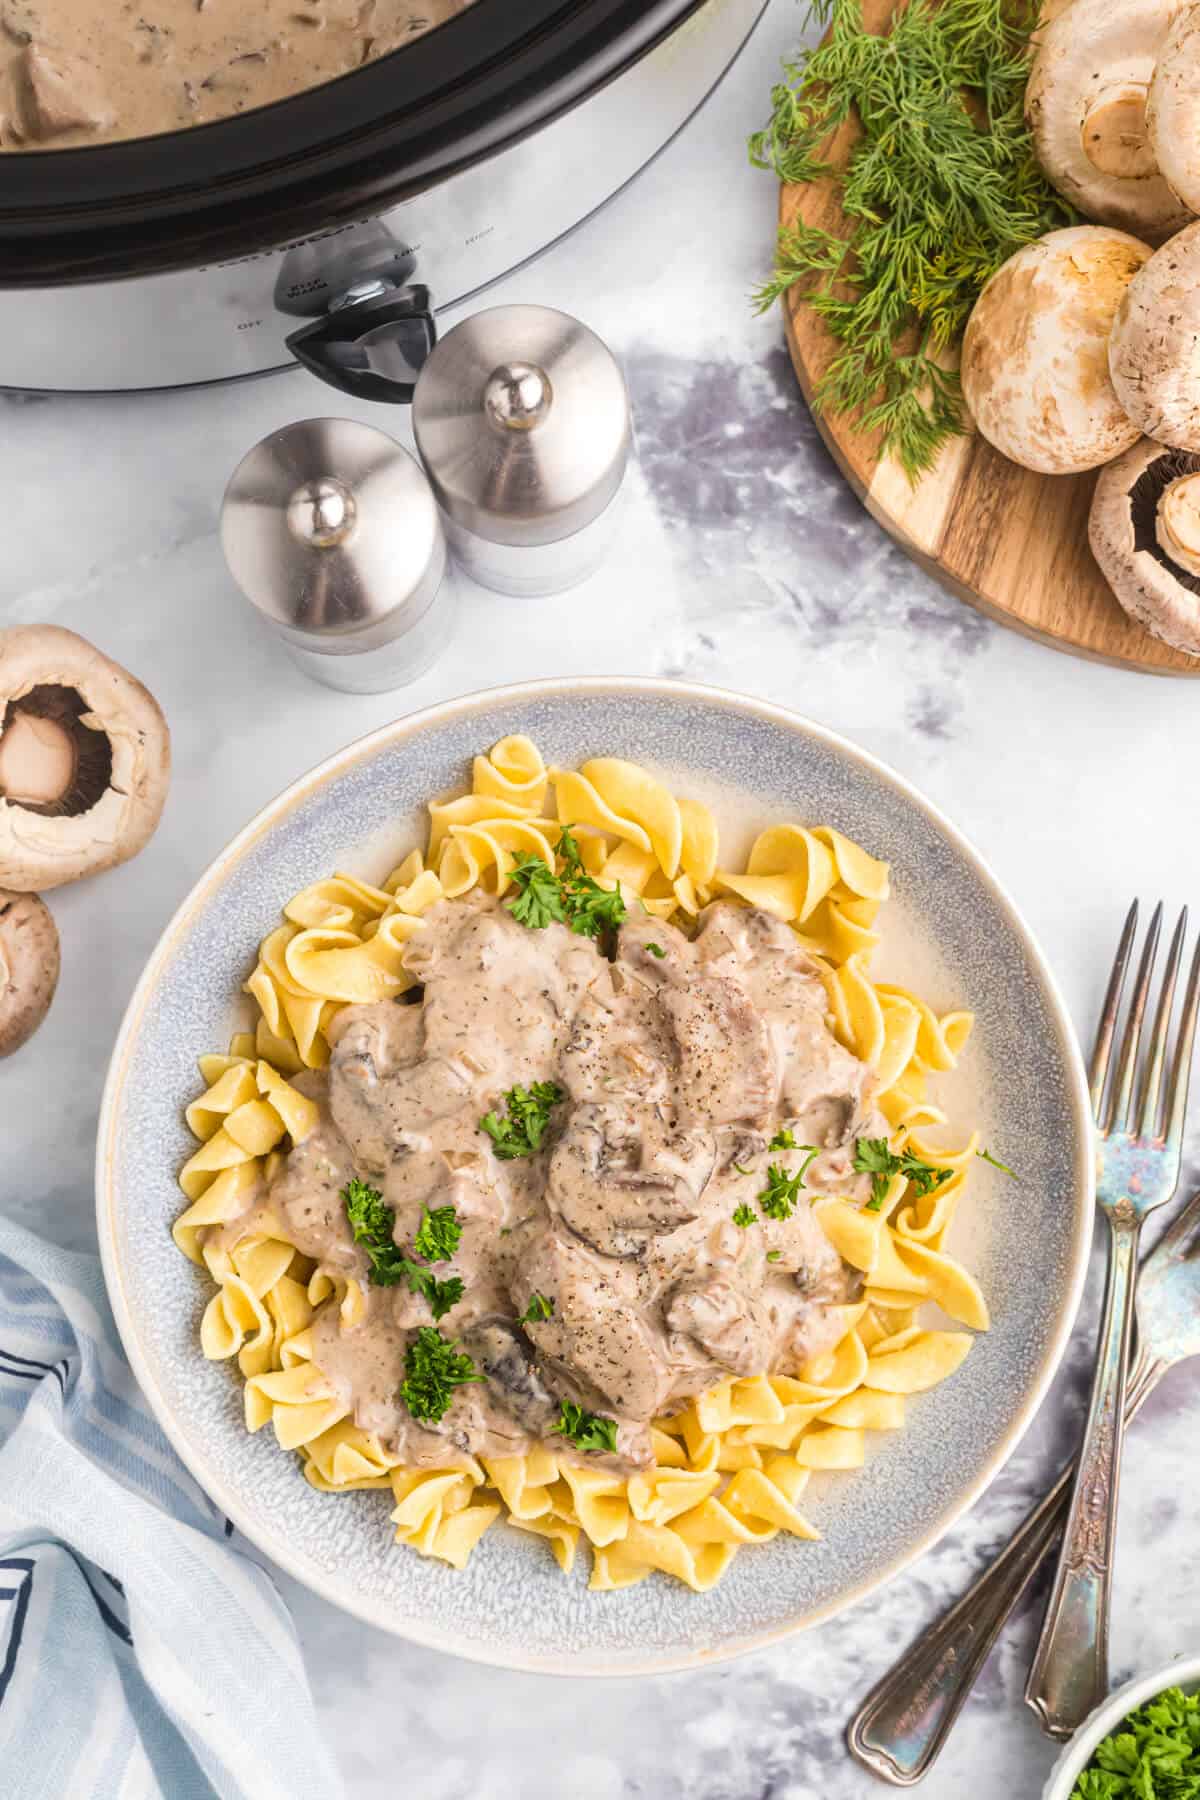 Beef stroganoff on a plate.